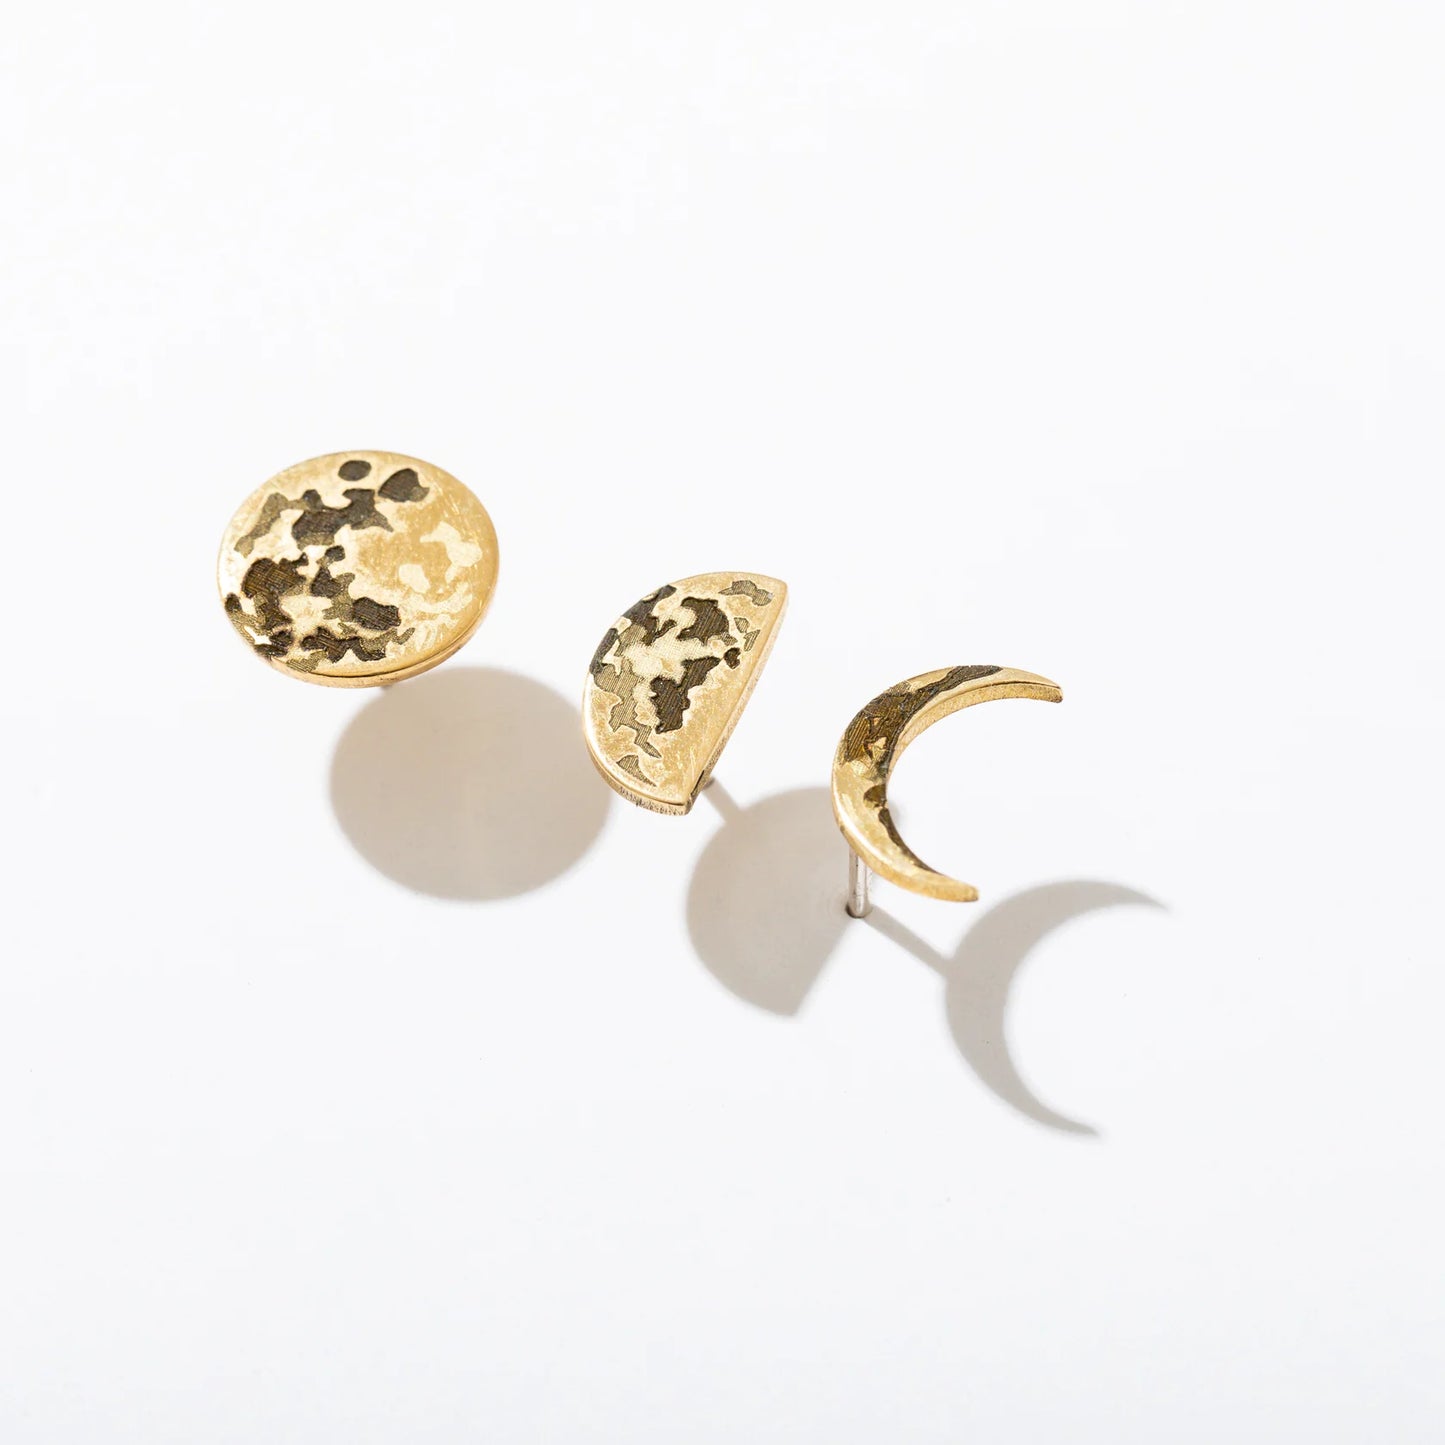 Standing on the Moon Stud Earring Pack